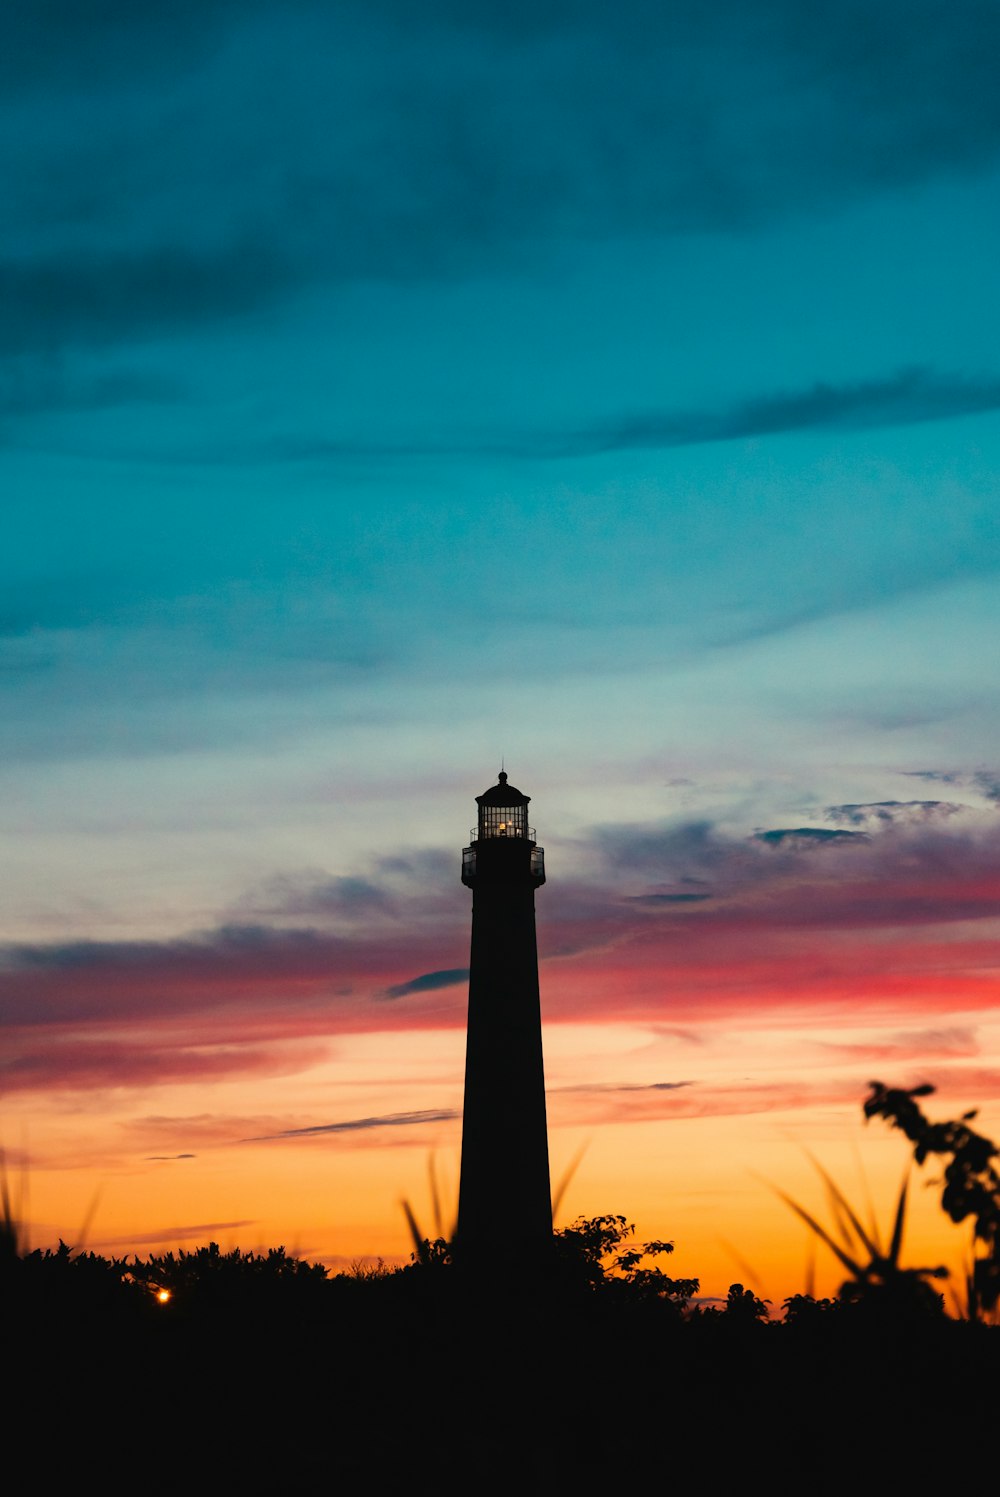 a lighthouse is silhouetted against a colorful sunset